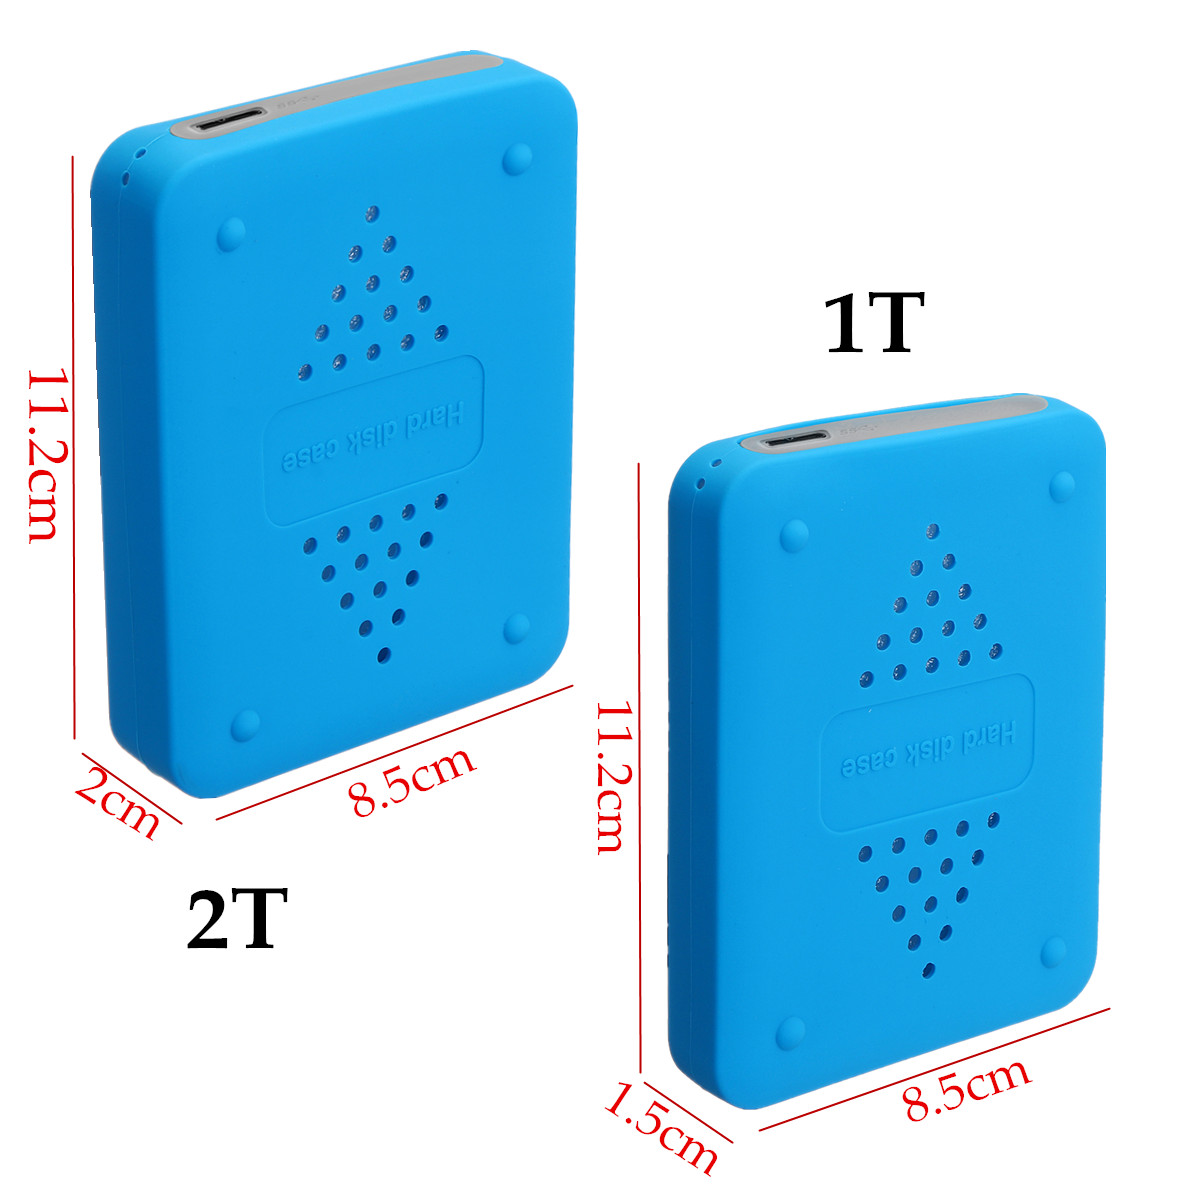 1T 2T Hard Drive Silicone Protect Case With Hanging Rope Hard Drive Enclosure 10